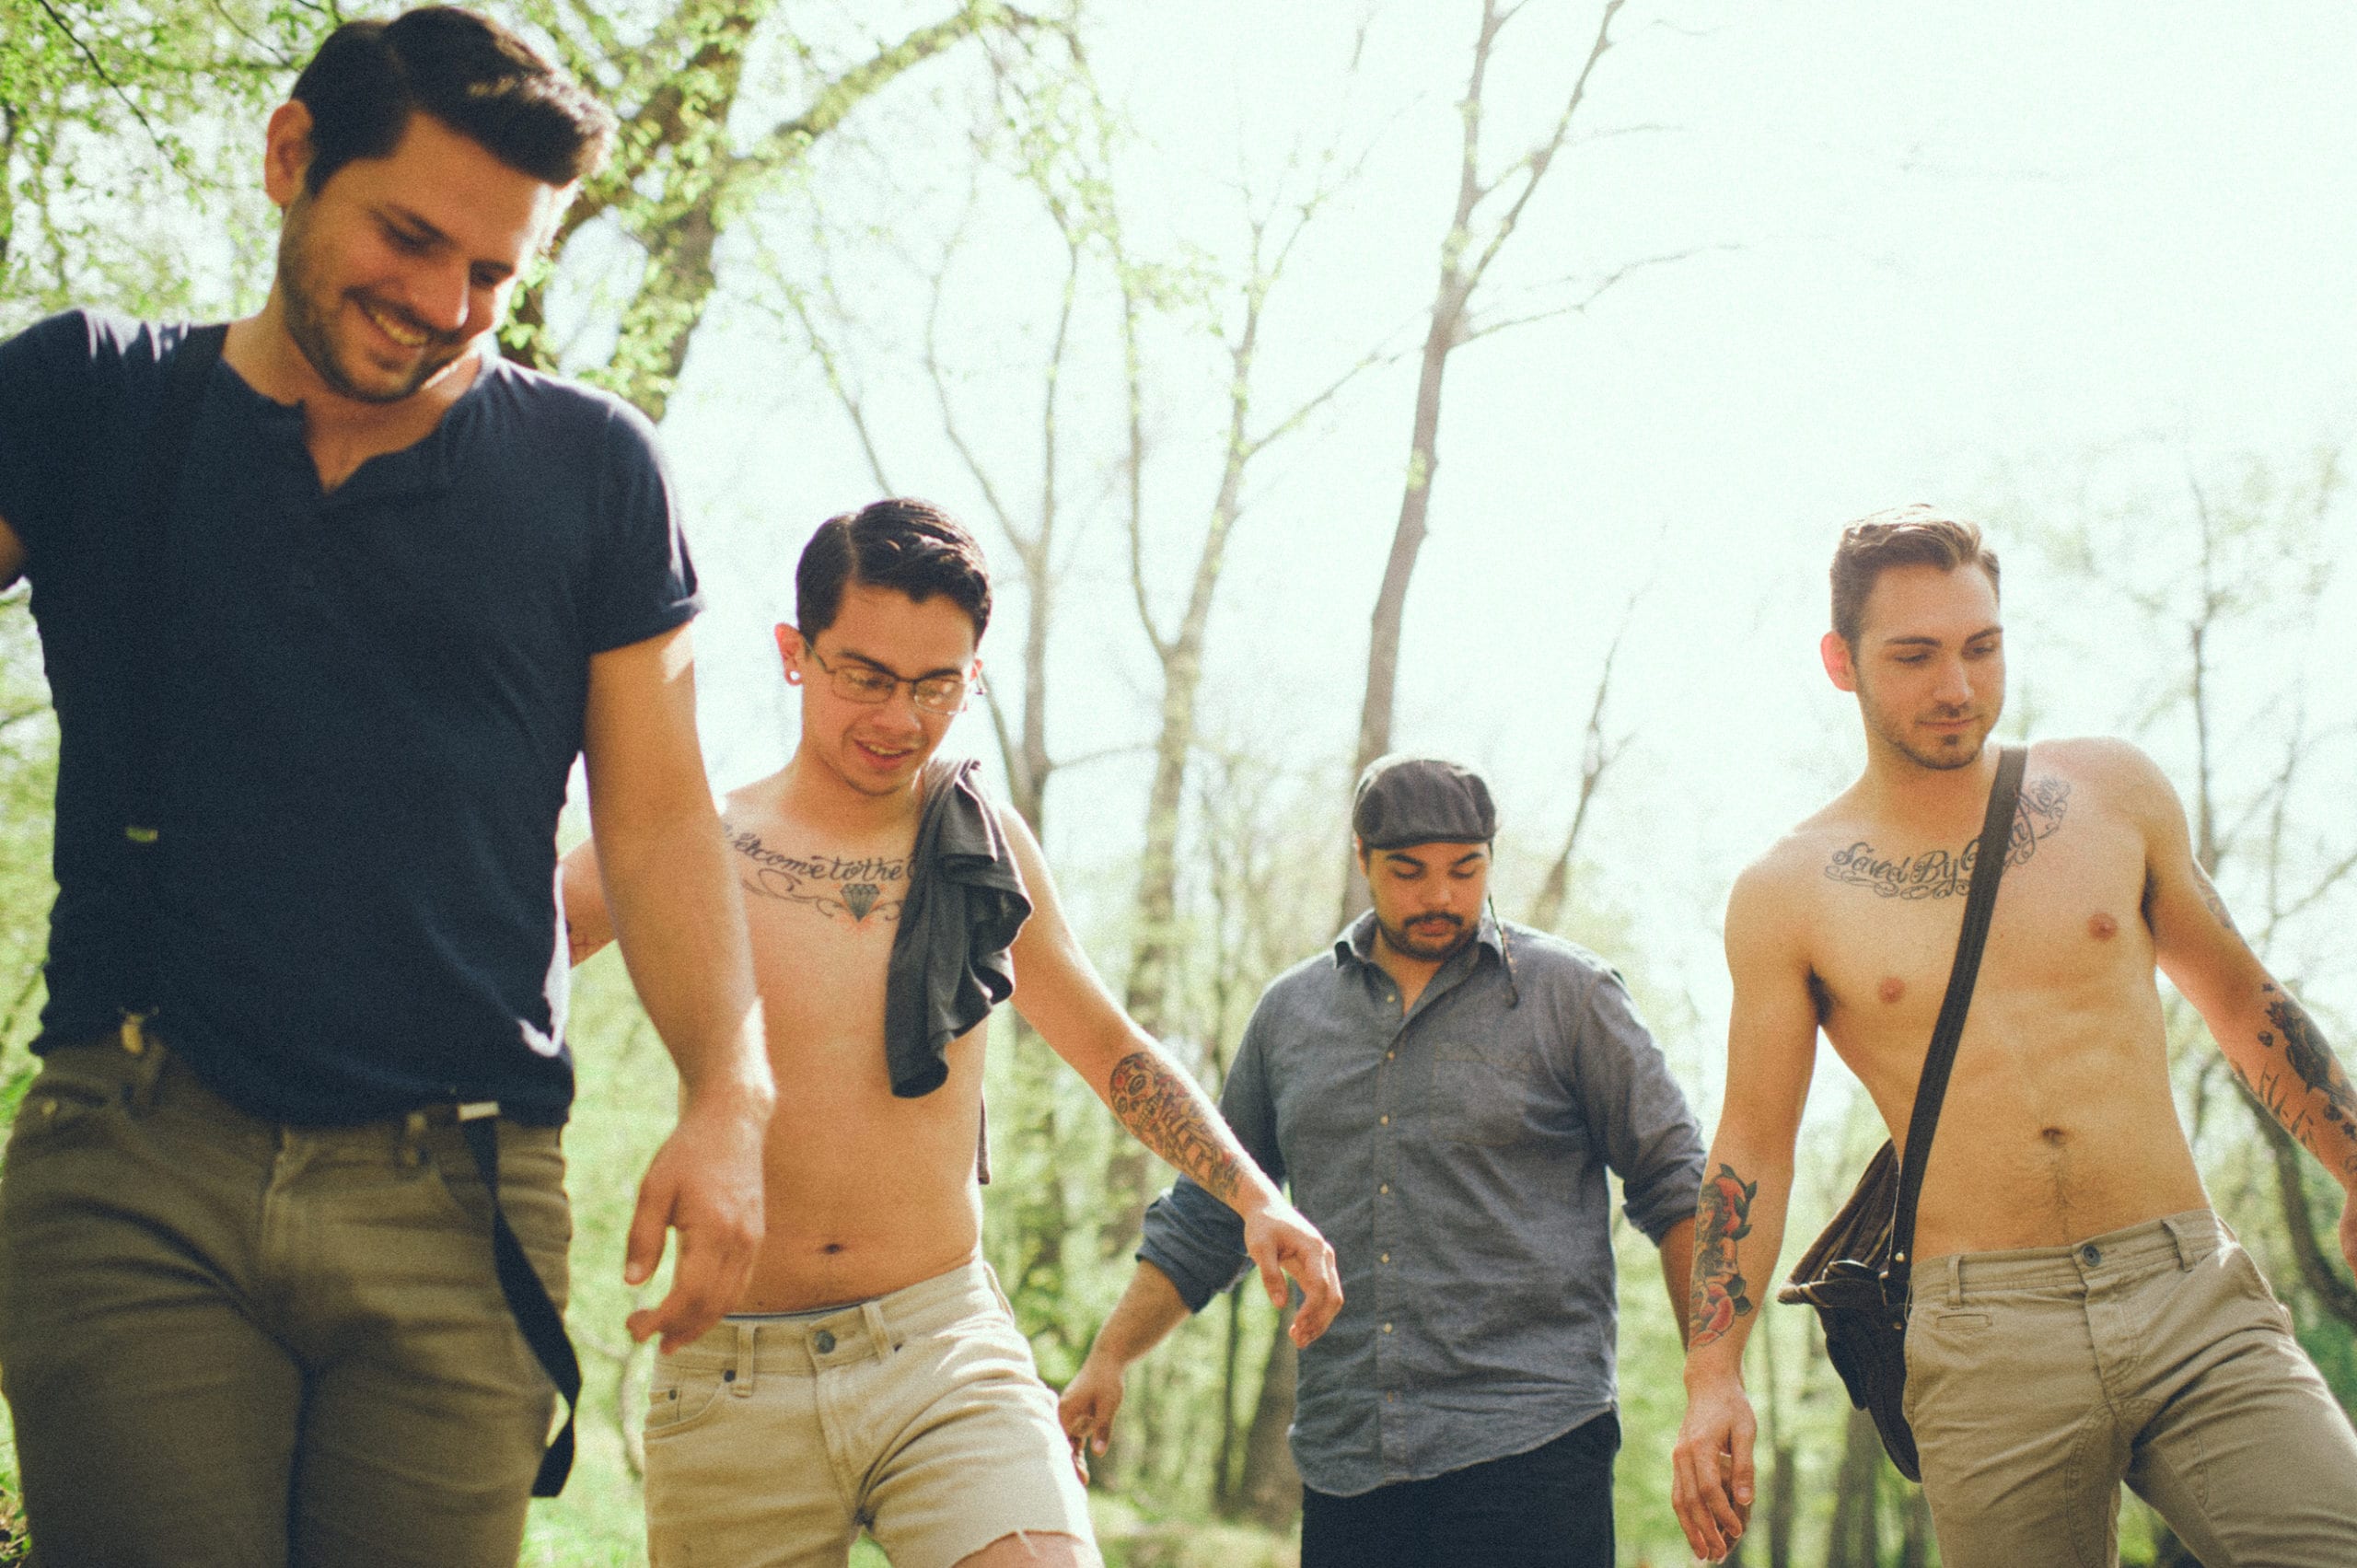 Kids American Indie Rock Band. Four men-two without shirts and have tattoos on arms and chest.